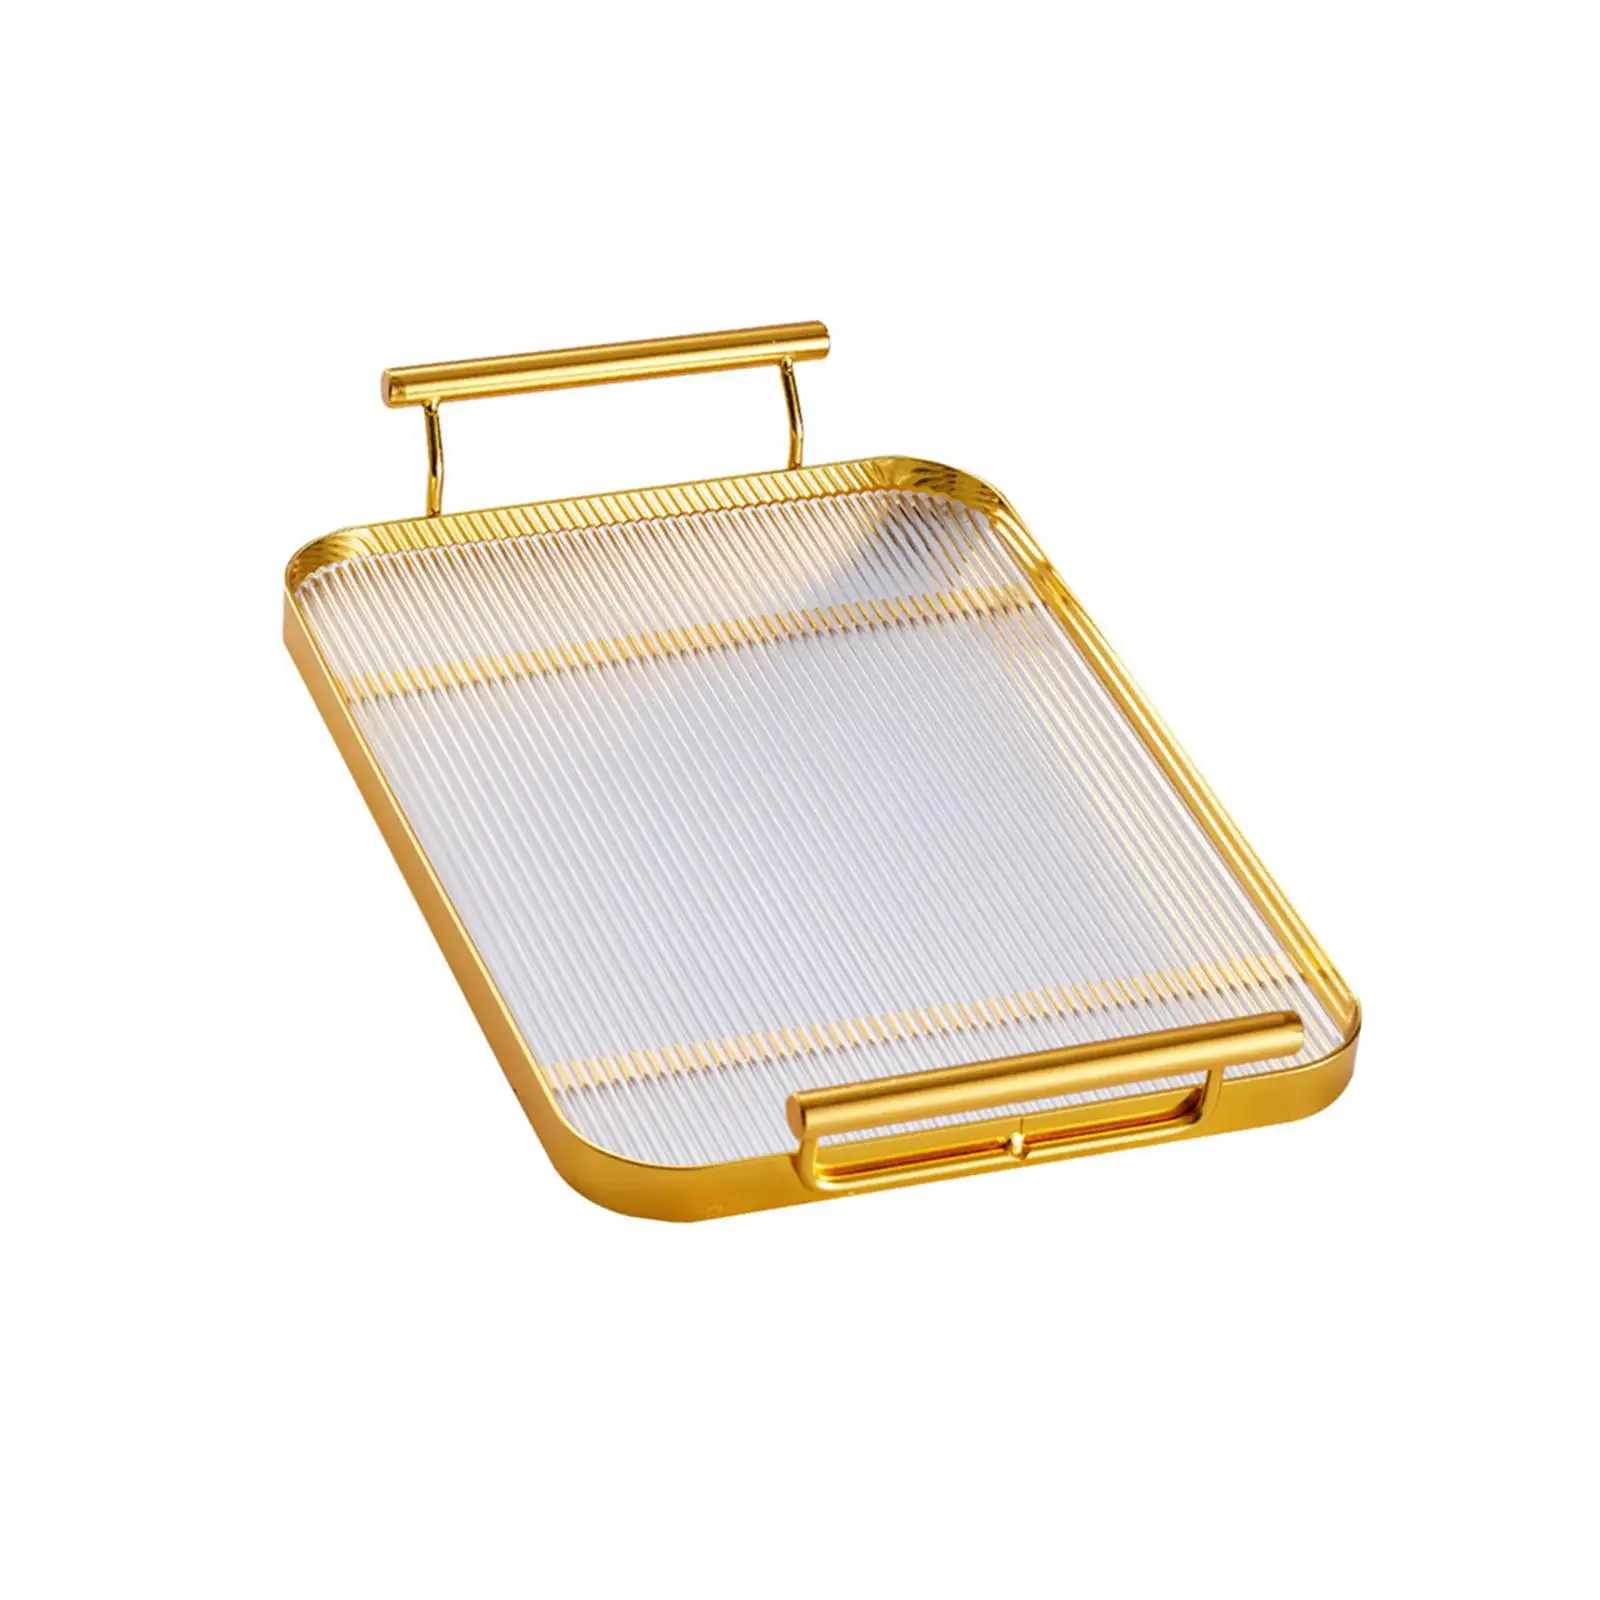 coffee servings Tray Entertaining Bathroom Tray for Kitchen Vanity Cabinet